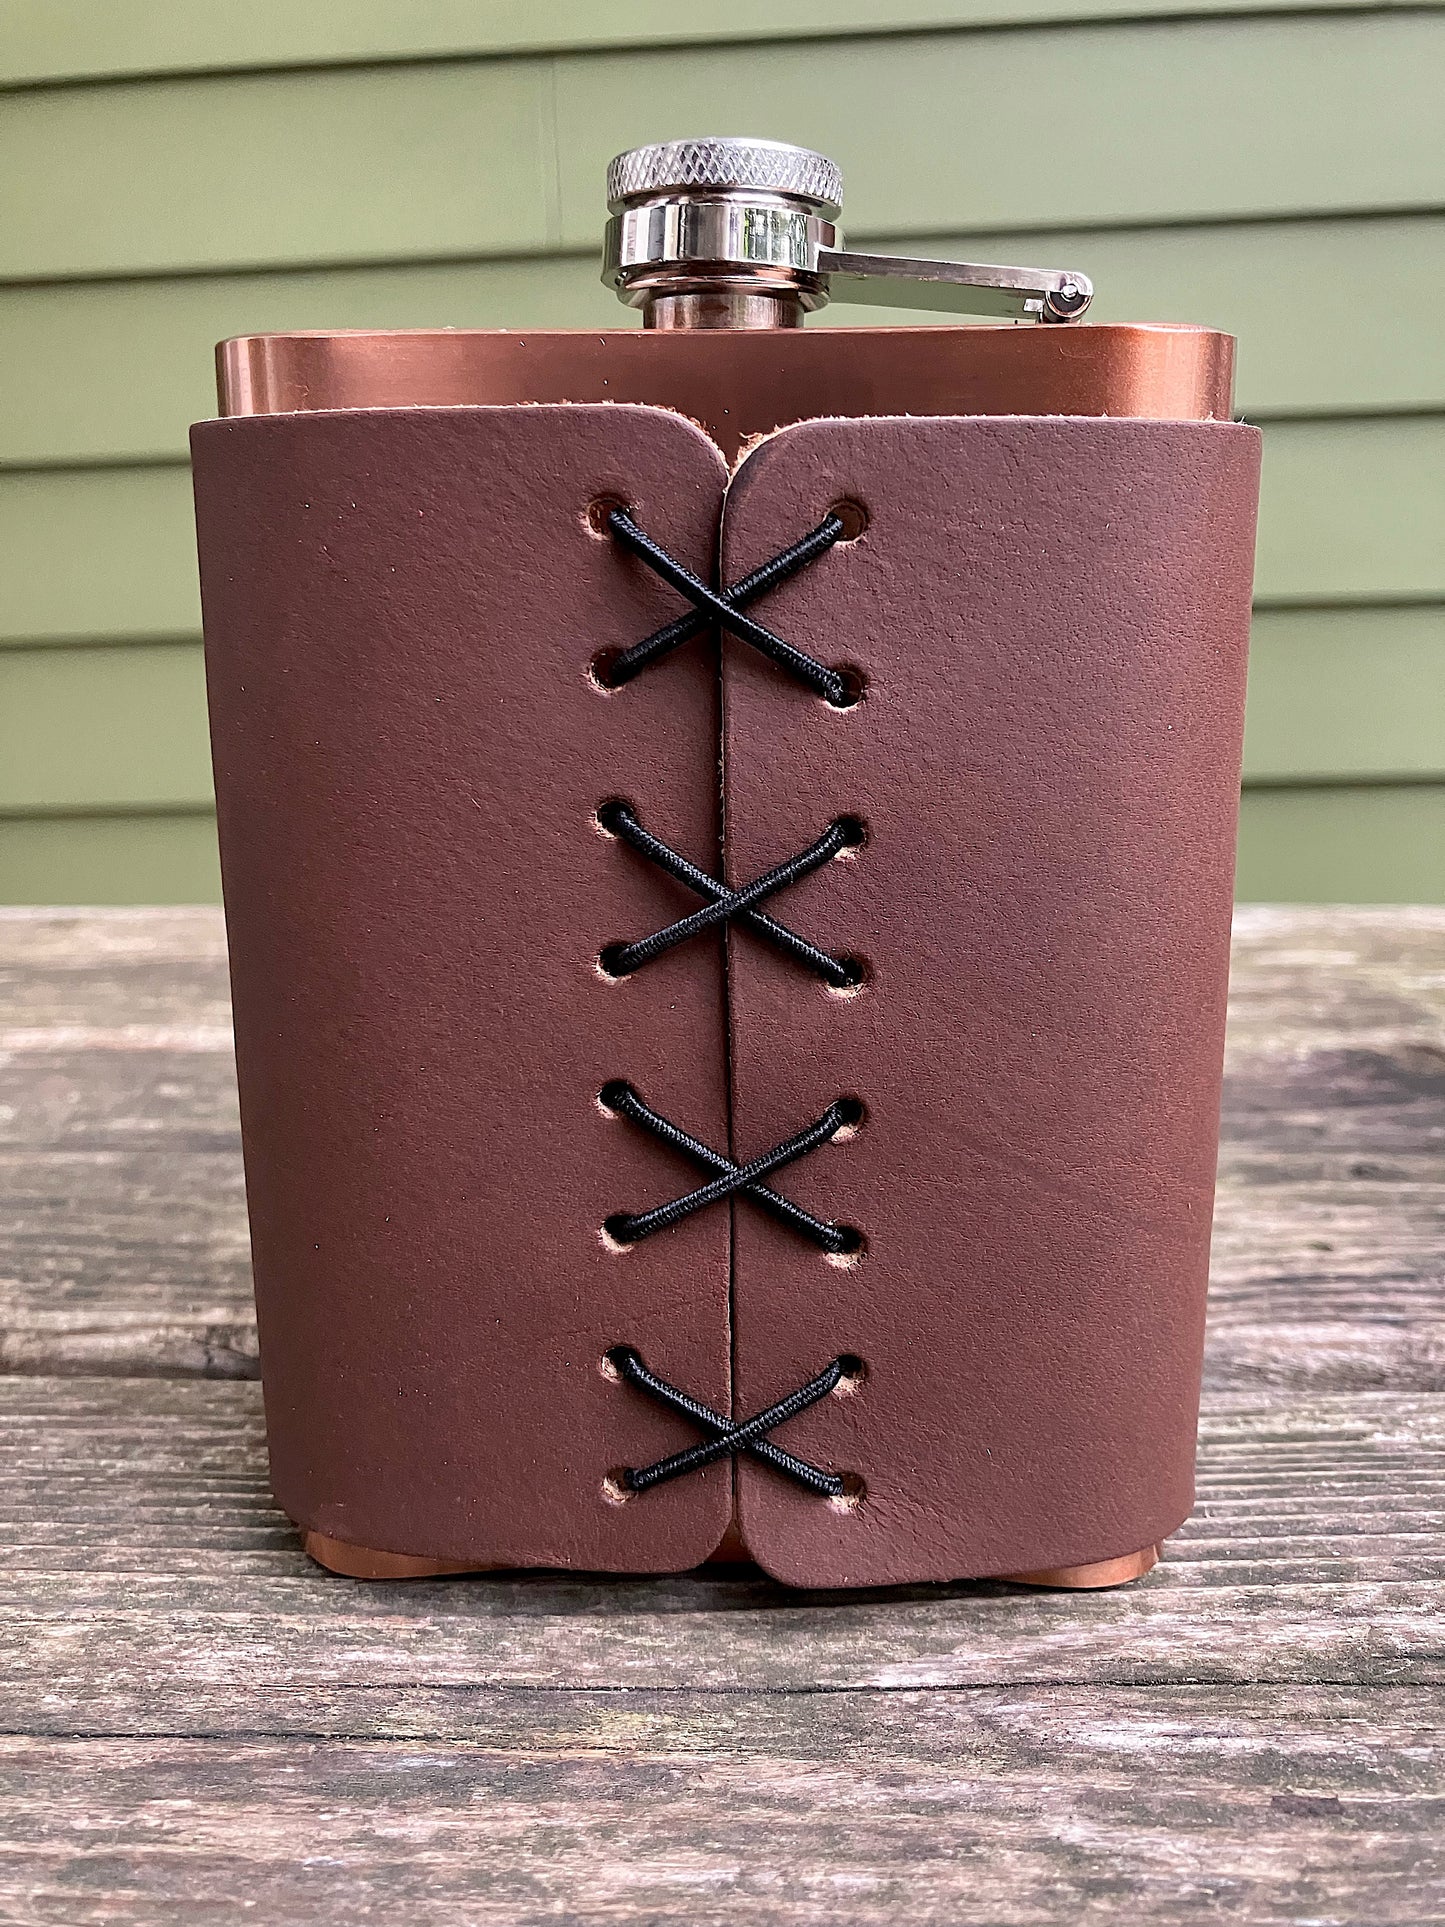 Leather Flask - Mountains And Elk